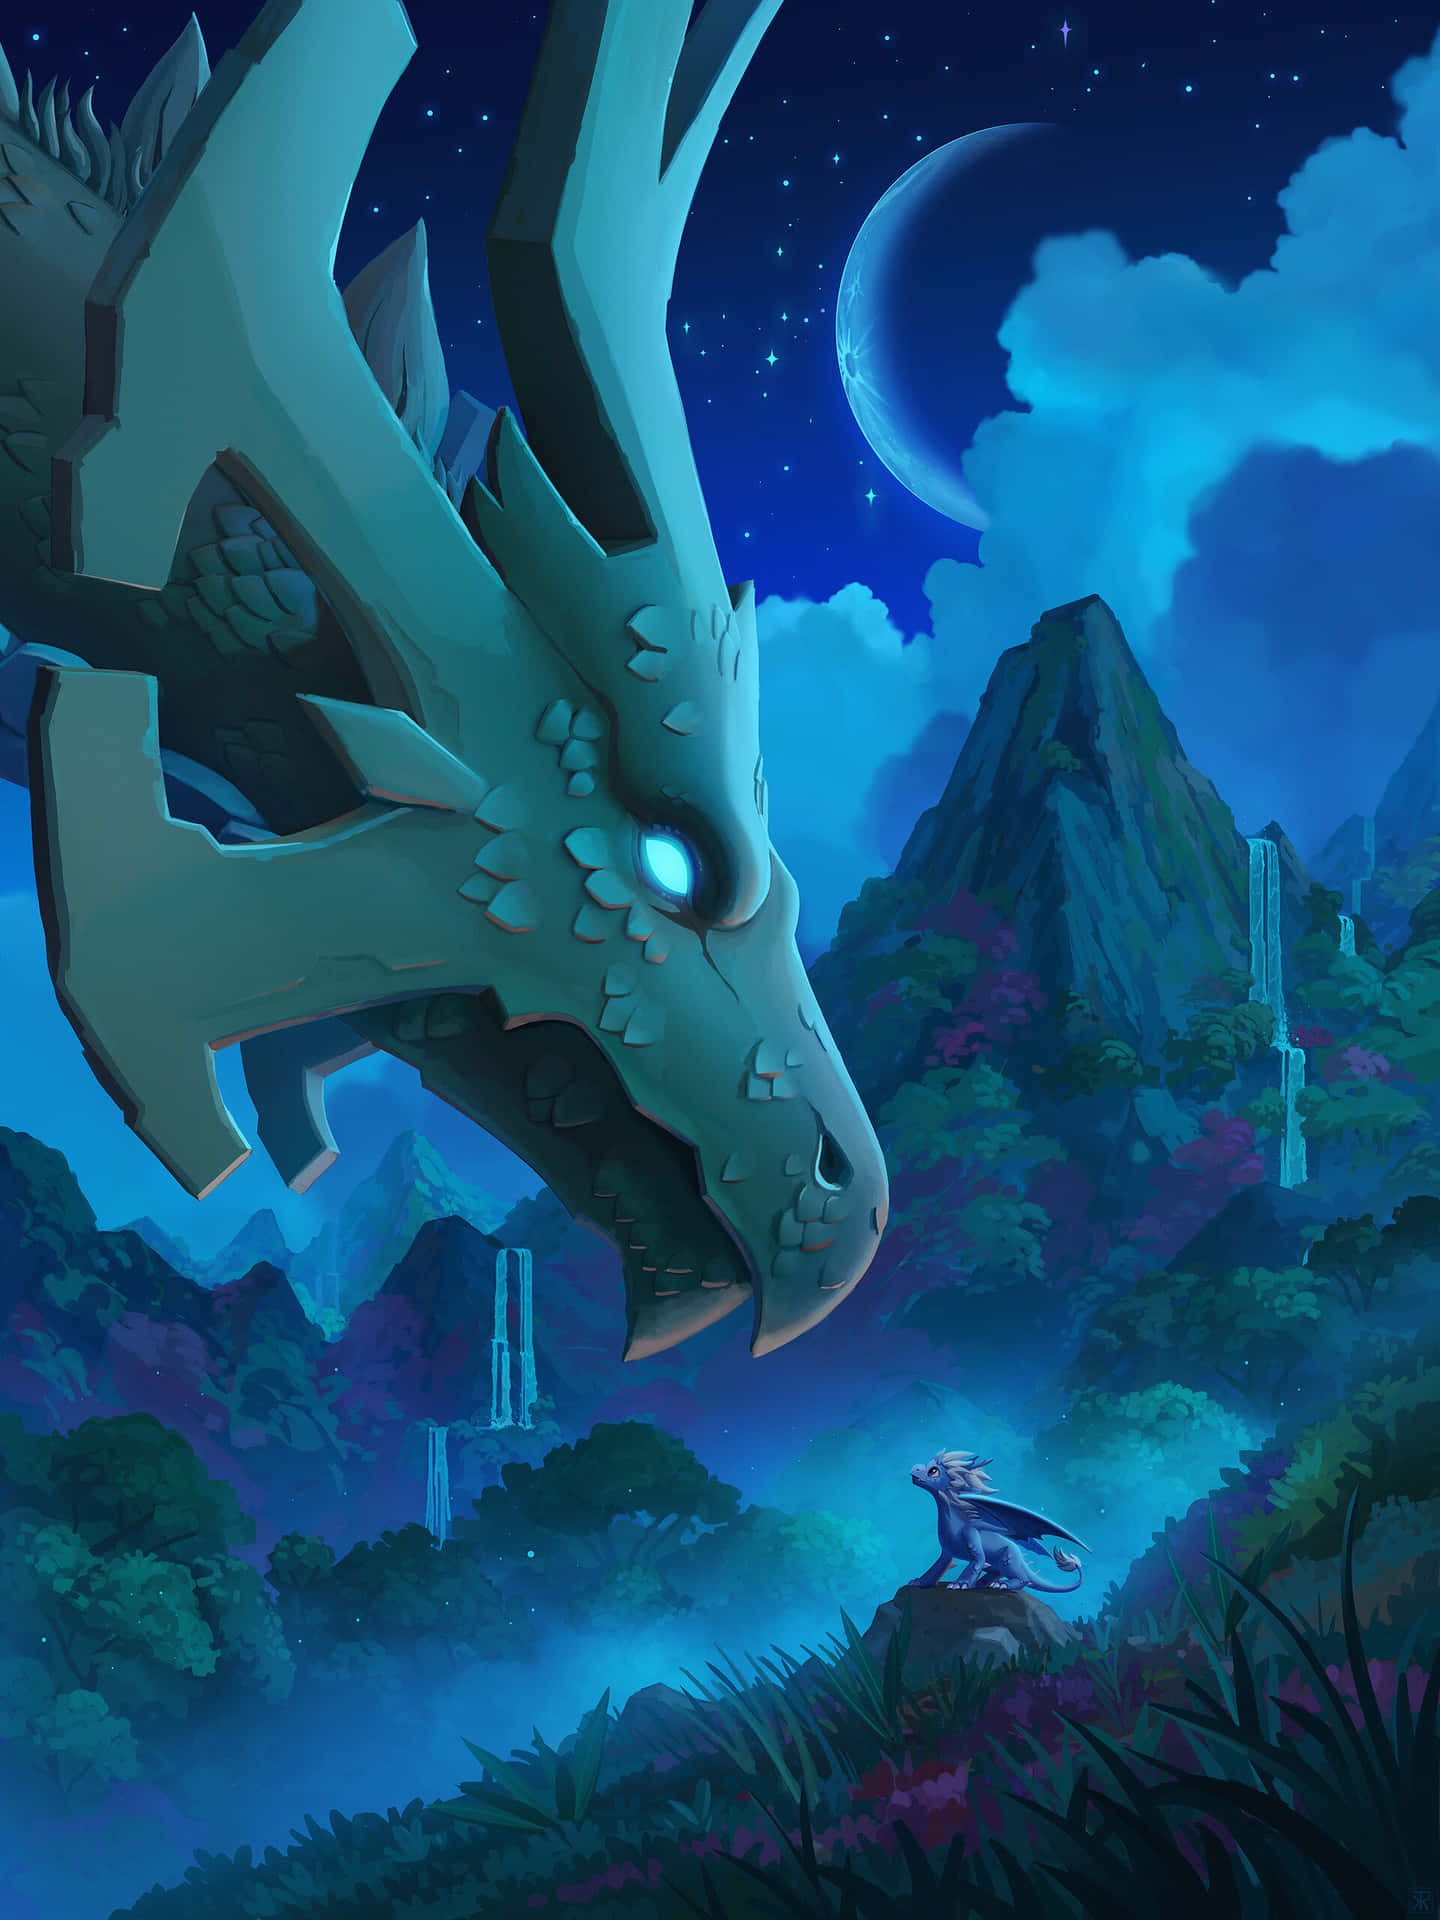 The Dragon Prince - New Adventures Ahead Wallpaper